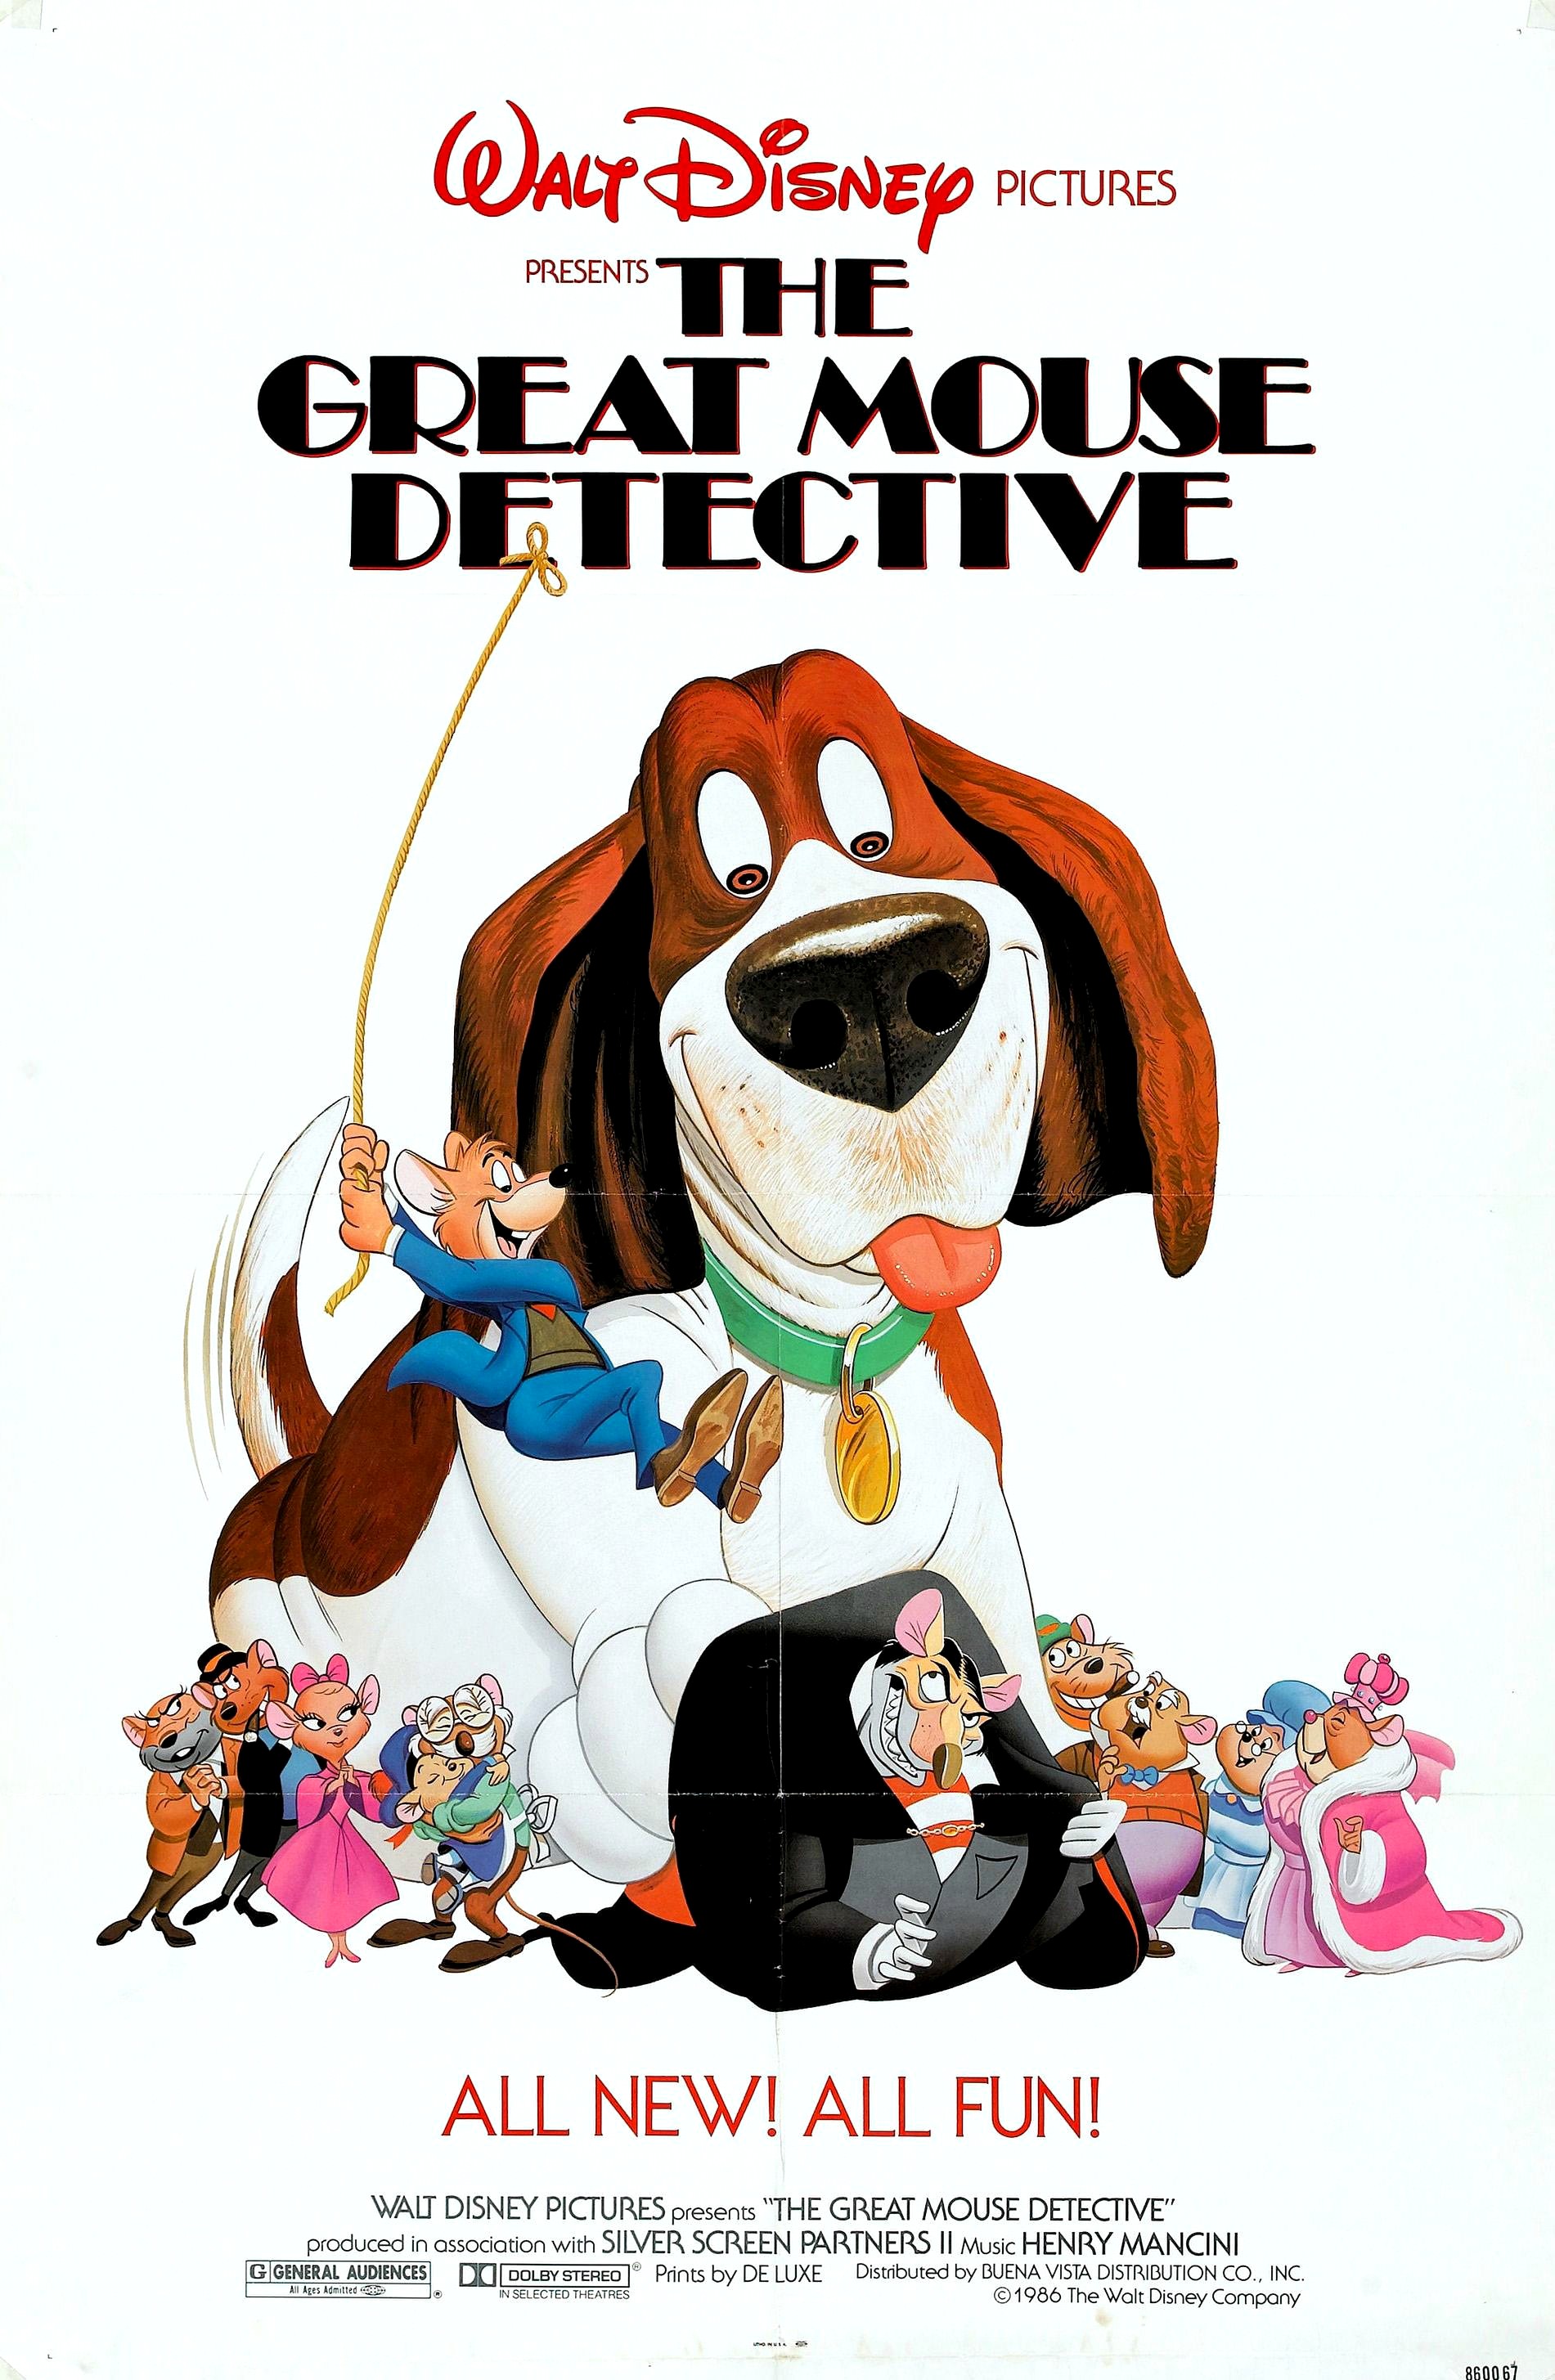 https://static.wikia.nocookie.net/disney/images/2/2b/The_Great_Mouse_Detective_poster.jpg/revision/latest?cb=20161107200053